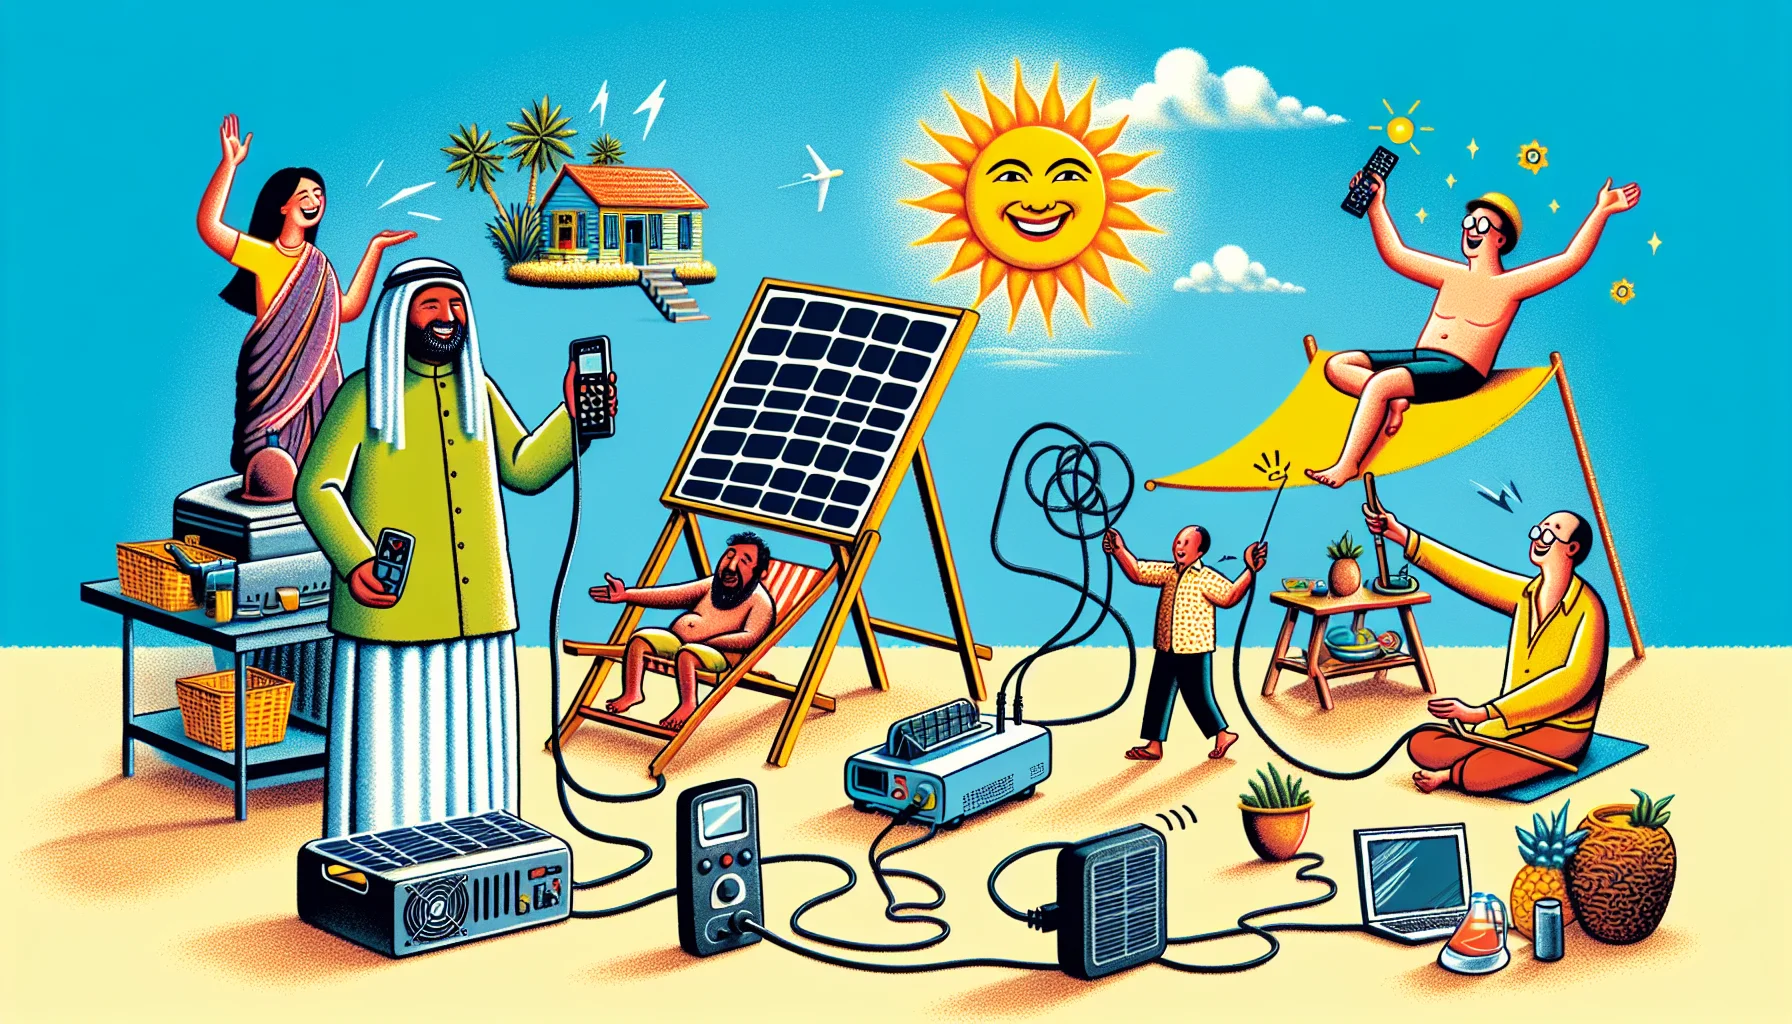 Create a humorous and captivating illustration showcasing an array of solar generators. The scene unfolds in a sunny suburban backyard, where a South Asian man is attempting to power up a small outdoor cinema using a solar generator. Meanwhile, a Middle-Eastern woman is teasingly holding a remote control in one hand and an unplugged cable in the other, pointing at the sun. To add to the quirkiness, a Caucasian child is pretending to sunbathe, holding a tiny solar panel instead of a reflector. The panel also connects to an odd, homemade gadget. Captions read 'Harness the Sun' and 'It's electrifyingly fun!'